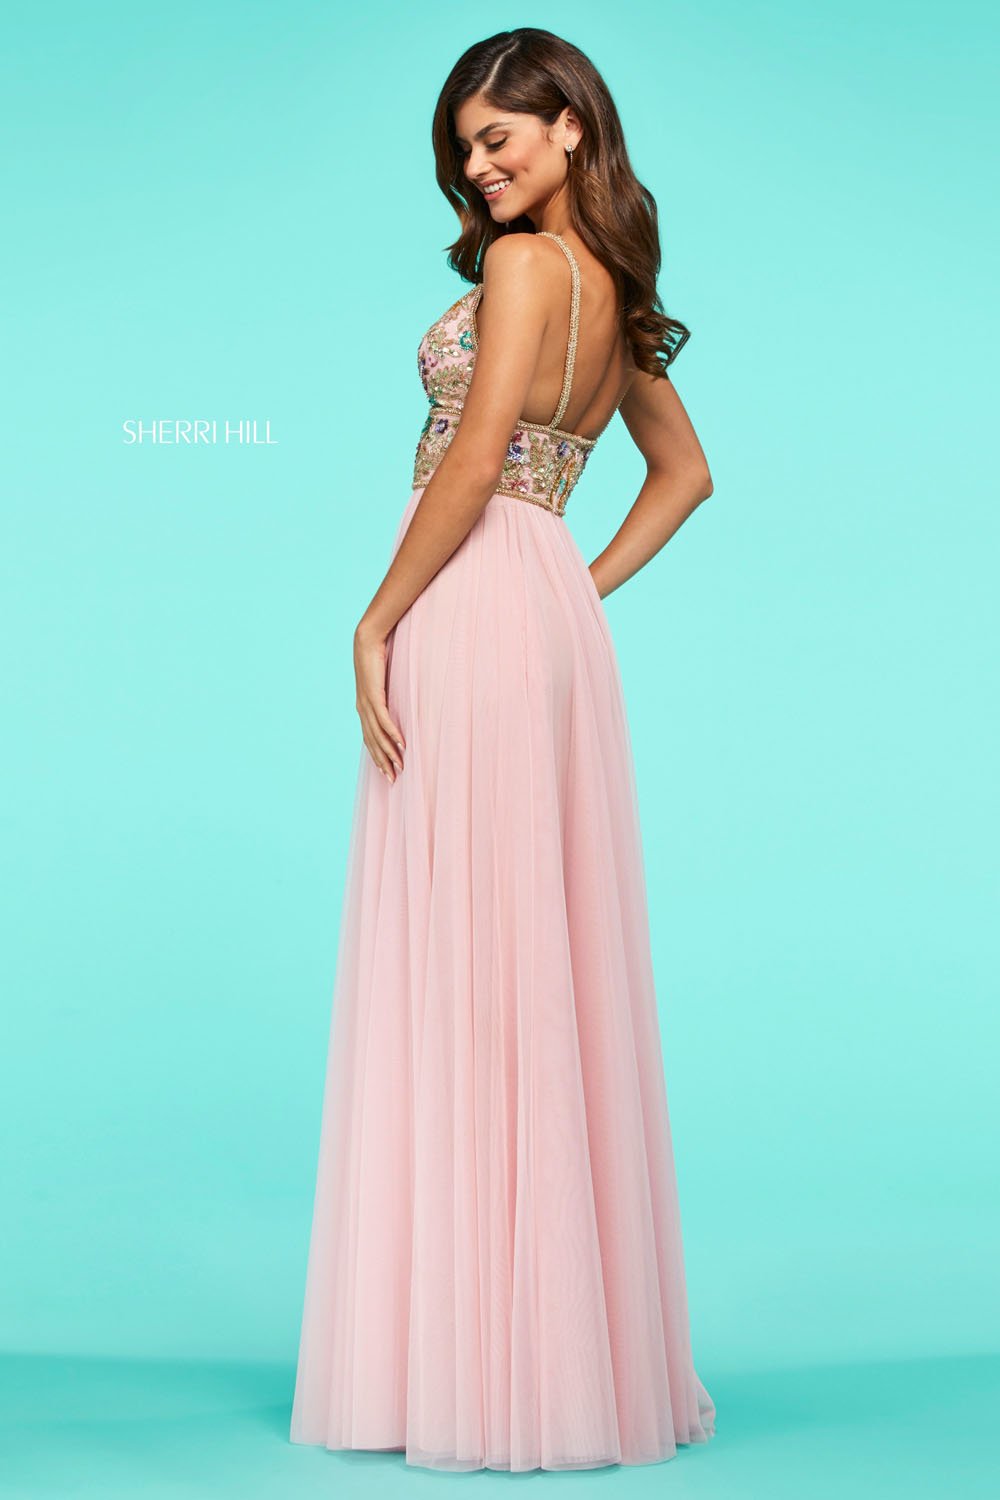 Sherri Hill 53567 dress images in these colors: Light Pink, Light Blue, Ivory, Yellow, Coral.